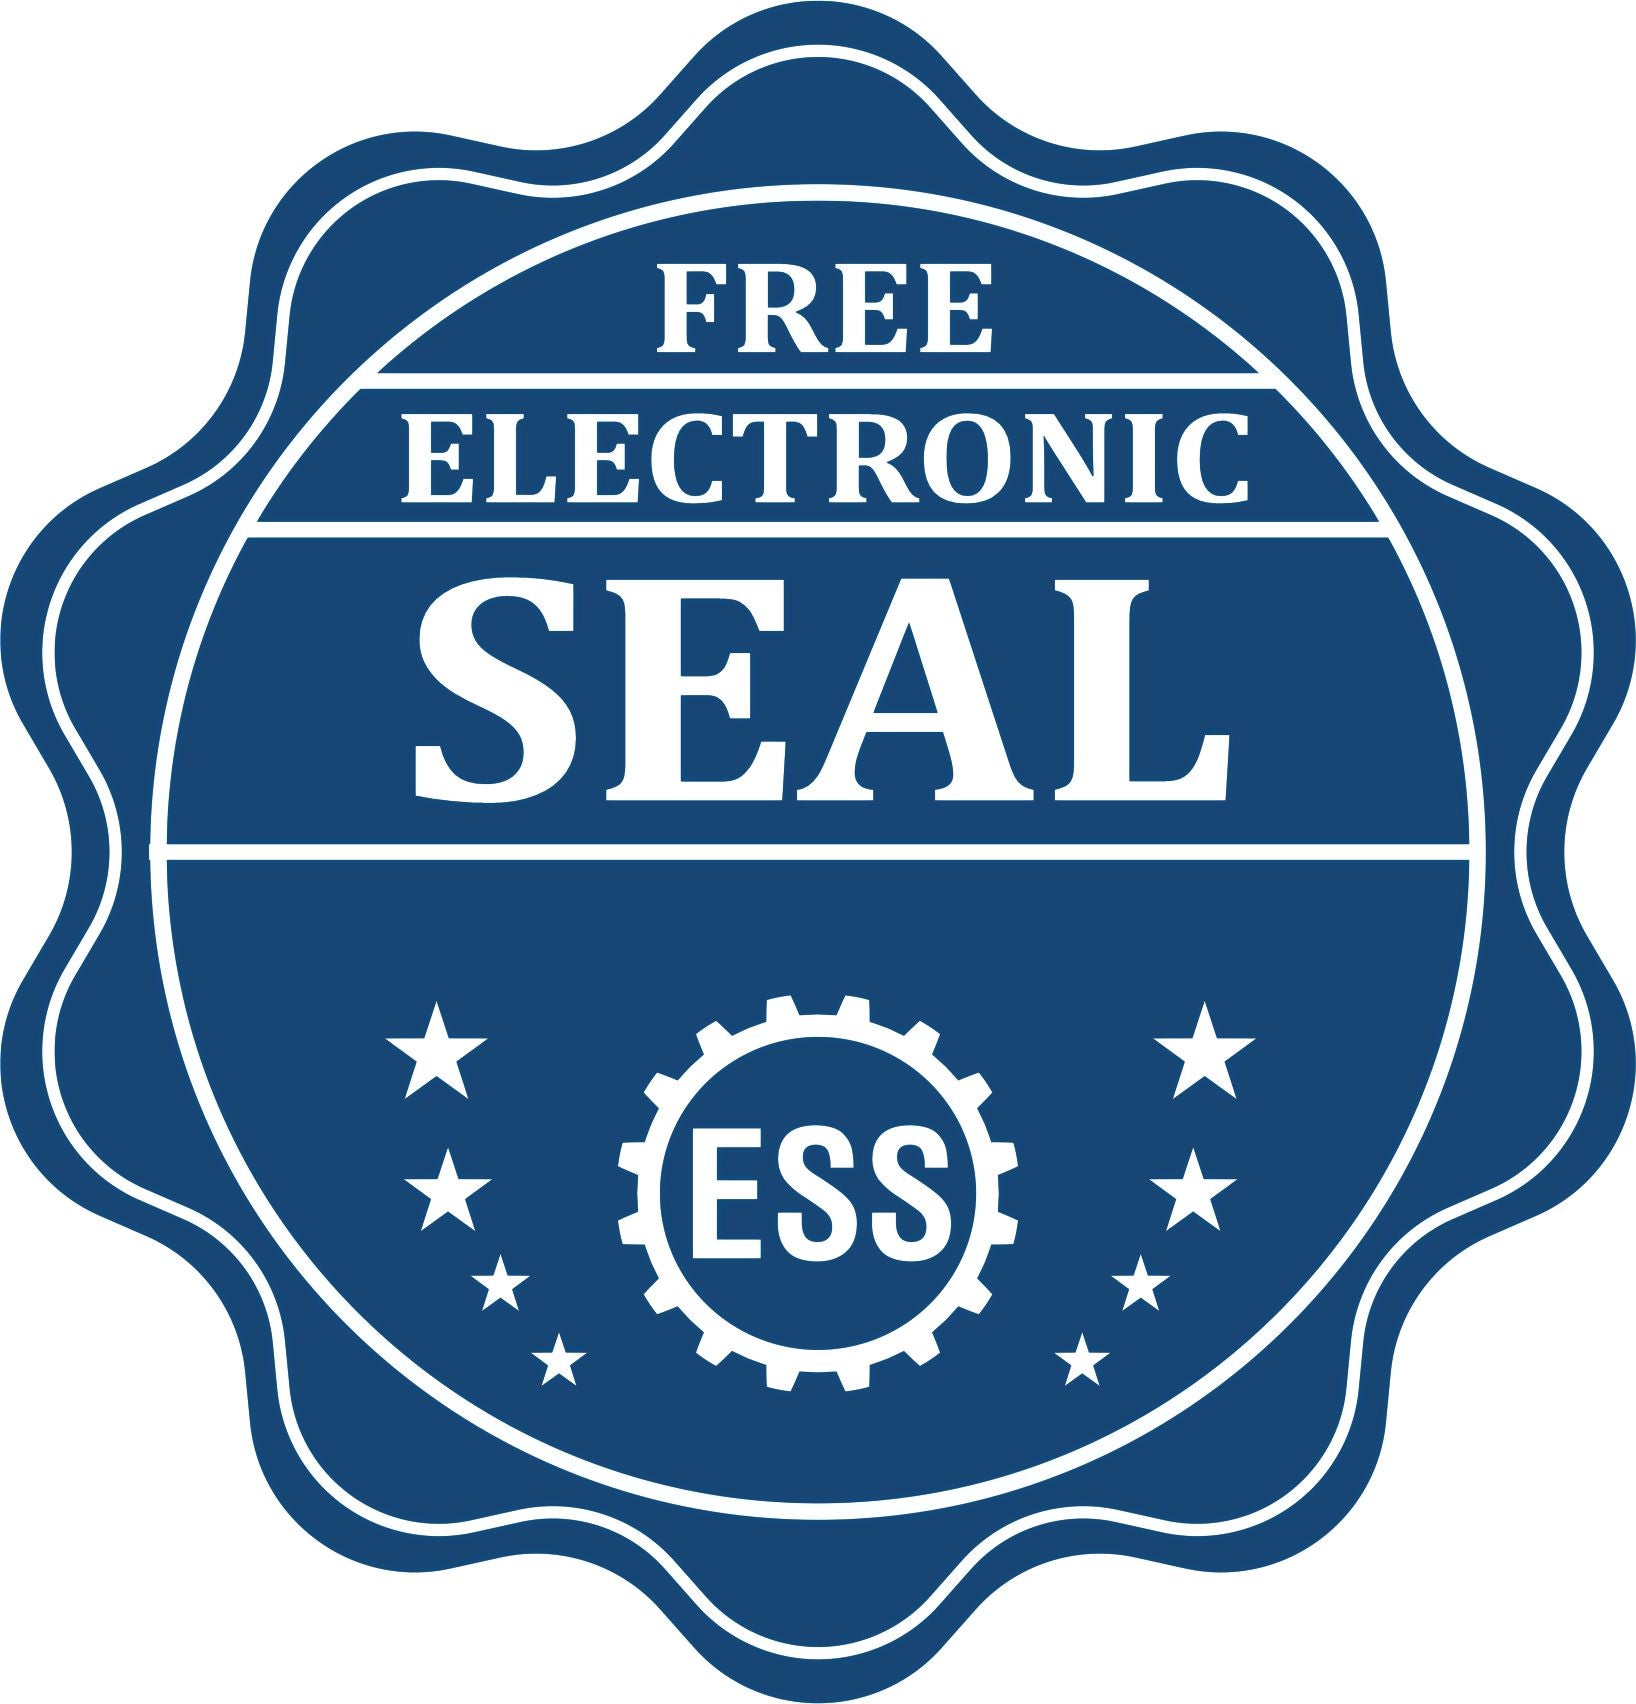 A badge showing a free electronic seal for the Long Reach Arizona Geology Seal with stars and the ESS gear on the emblem.